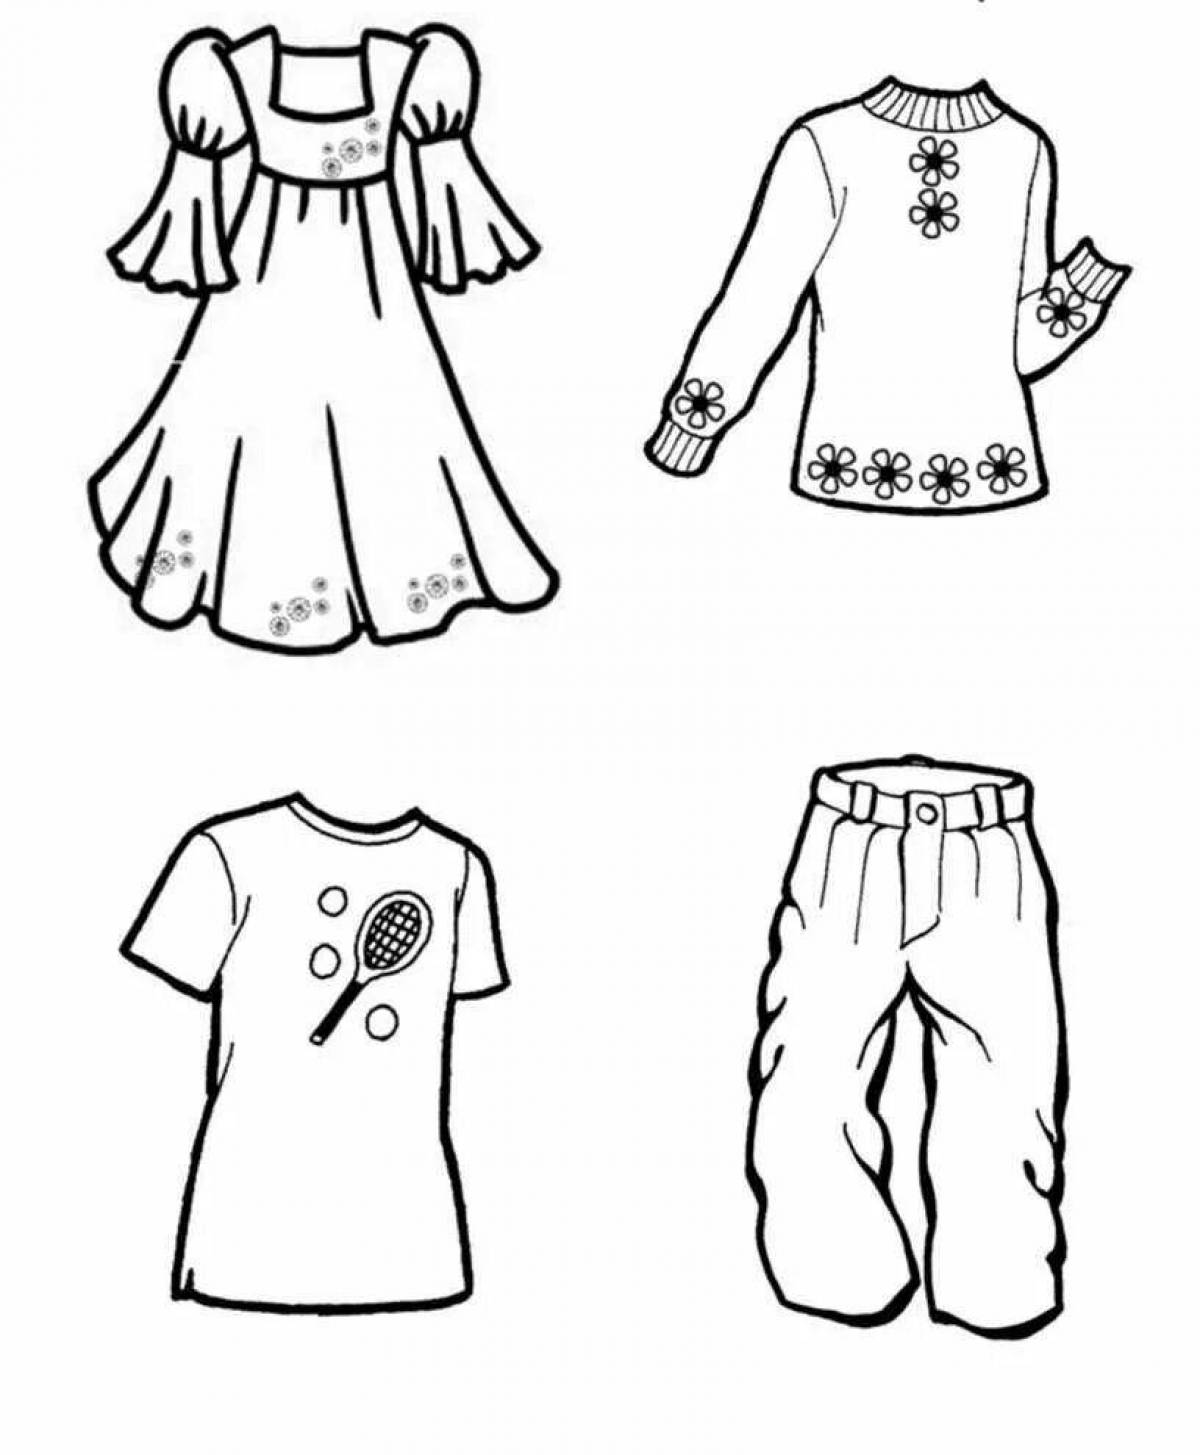 Luminous coloring for children's clothing